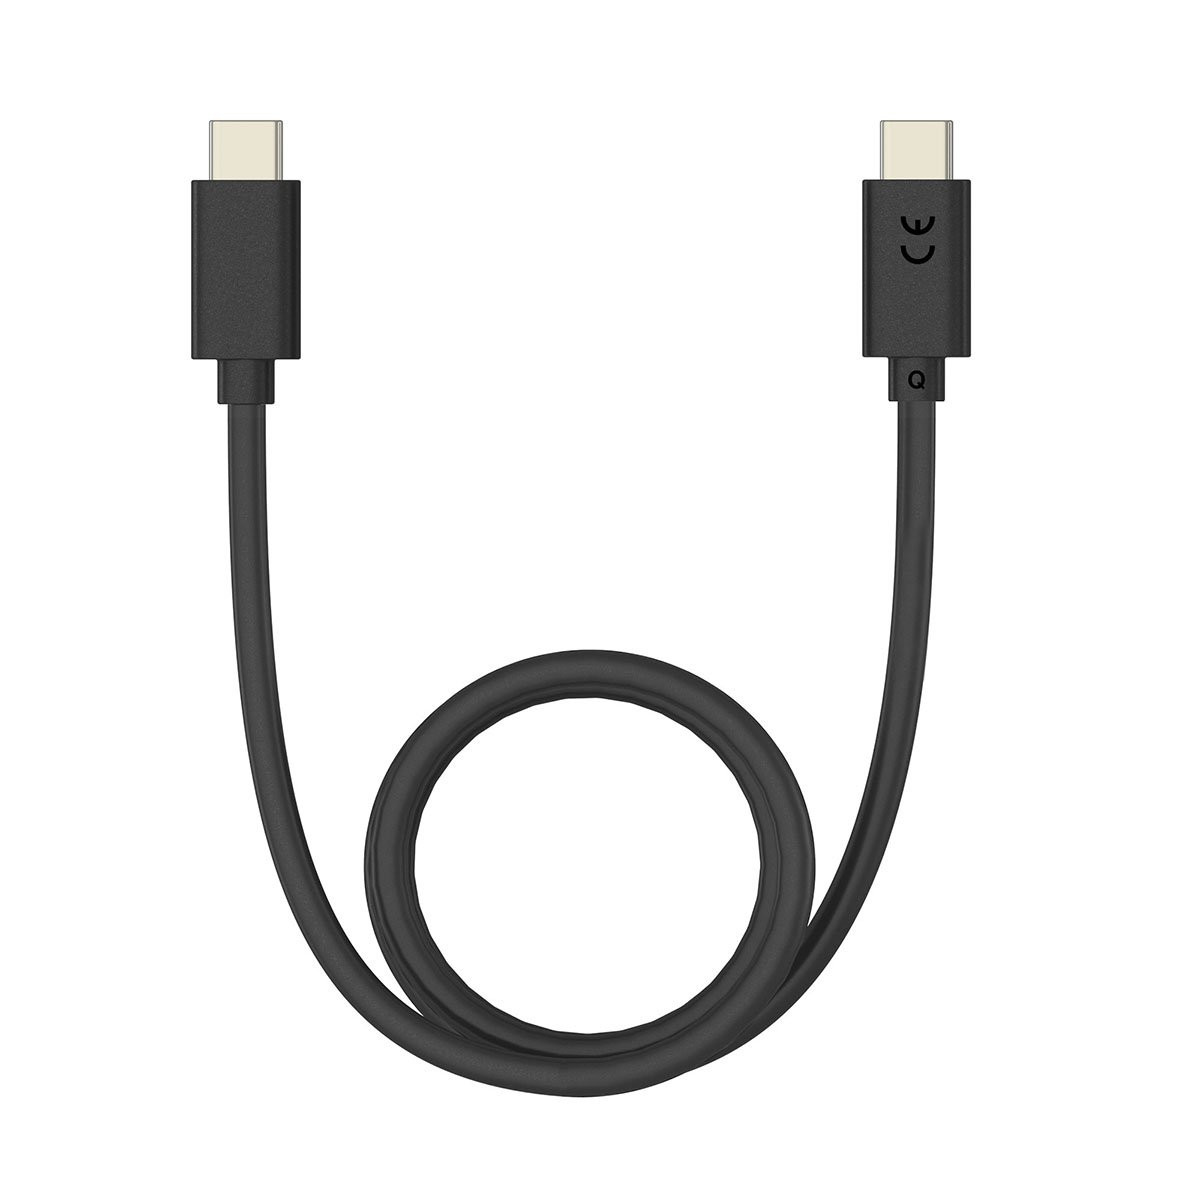 Discover USB 2.0 Cable Type C to C